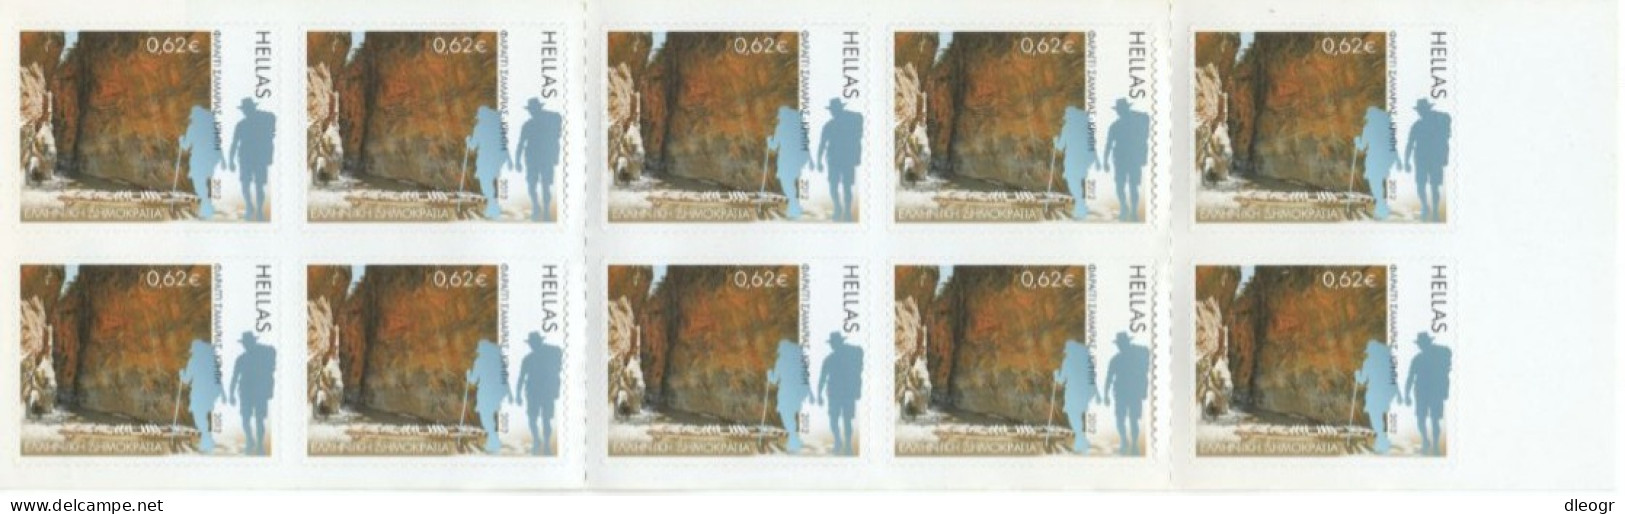 Greece 2012 Touring 2x BOOKLETS (B55-56) MNH VF. - Booklets